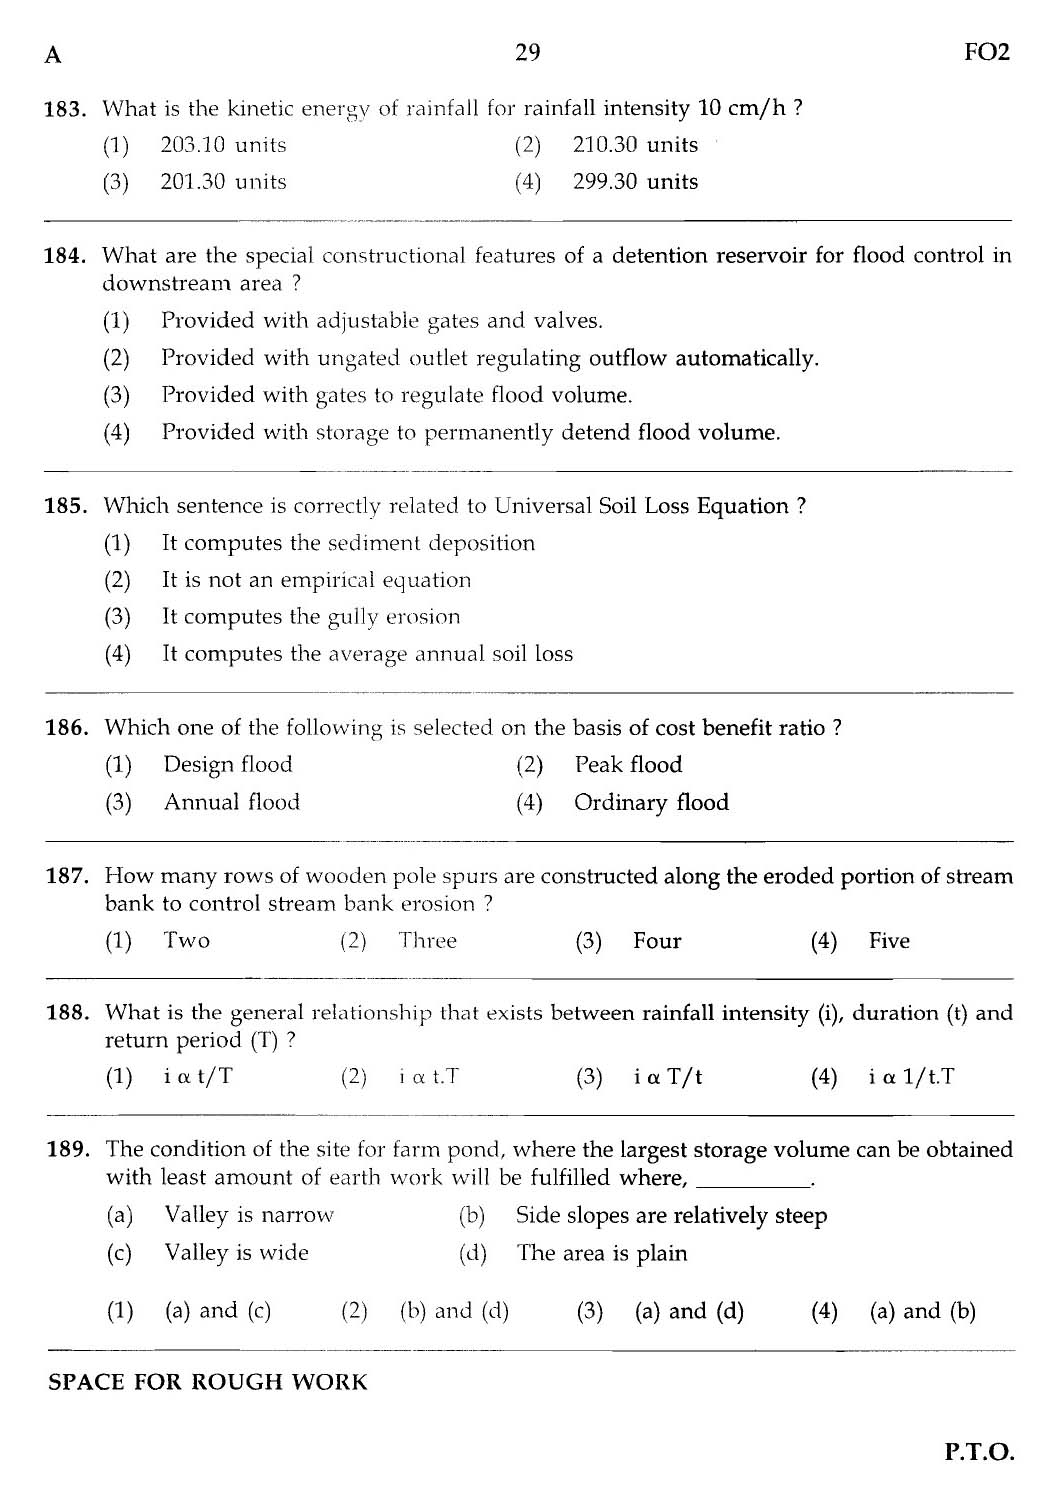 MPSC Agricultural Services Main Exam 2012 Question Paper Agricultural Engineering 28